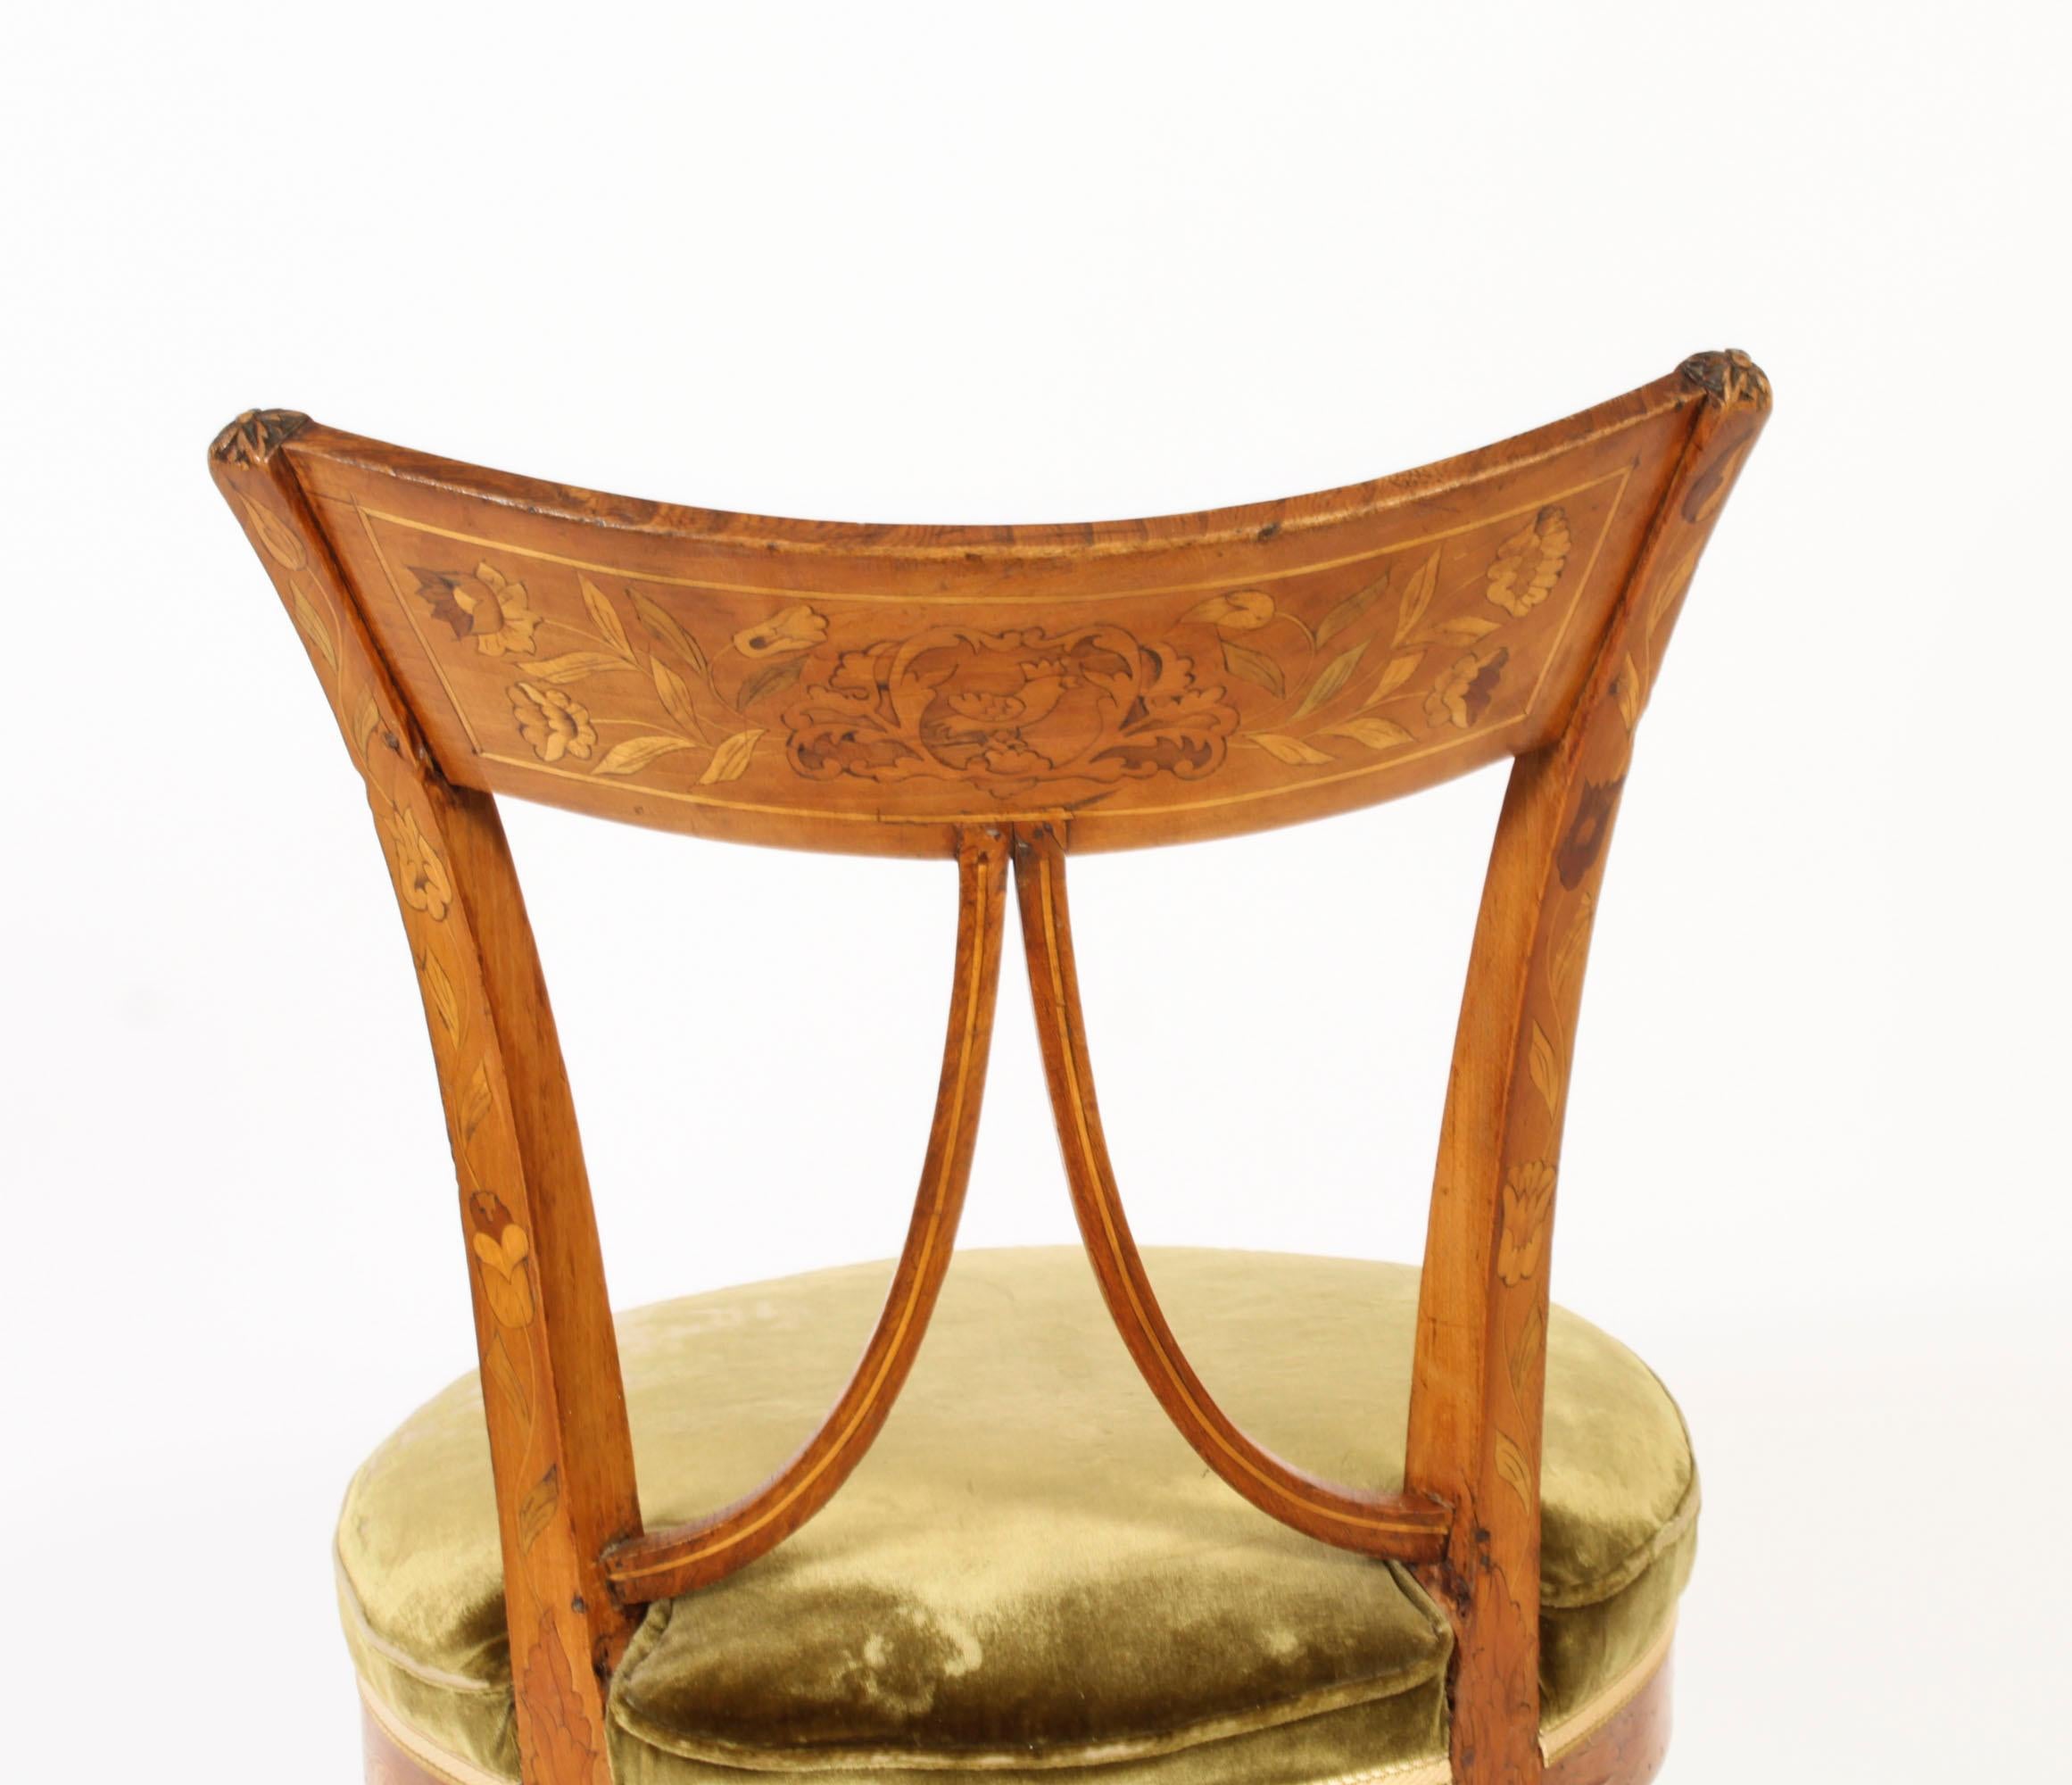 Antique Dutch Satinwood Marquetry Desk Chair 19th Century For Sale 8